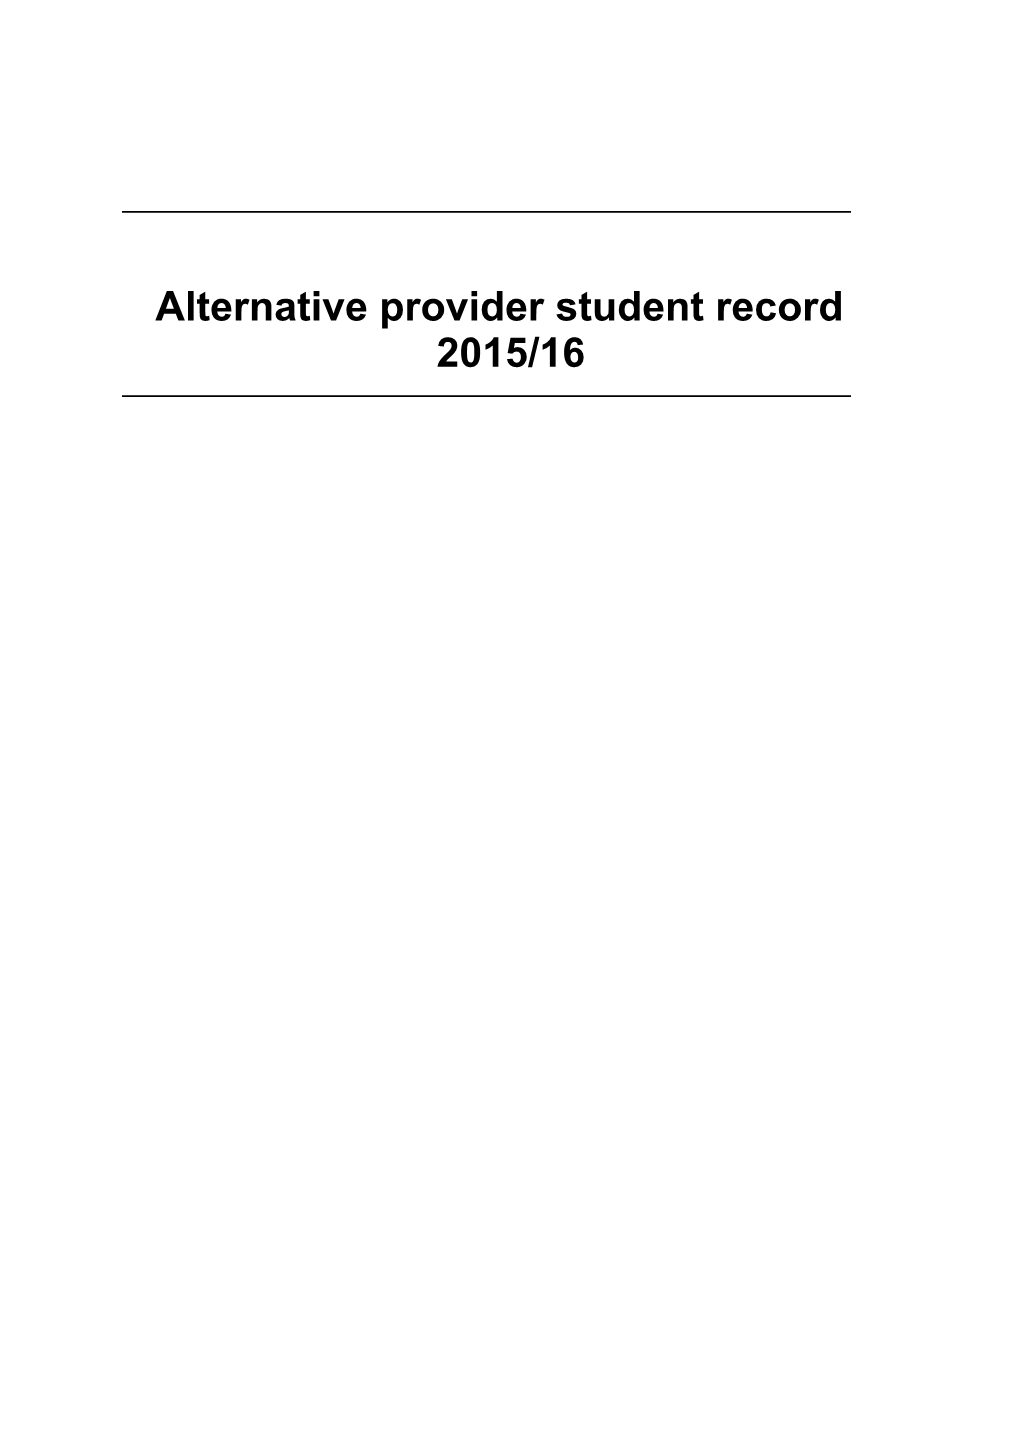 Alternative Provider Student Record 2015/16 Table of Contents (By Entity)